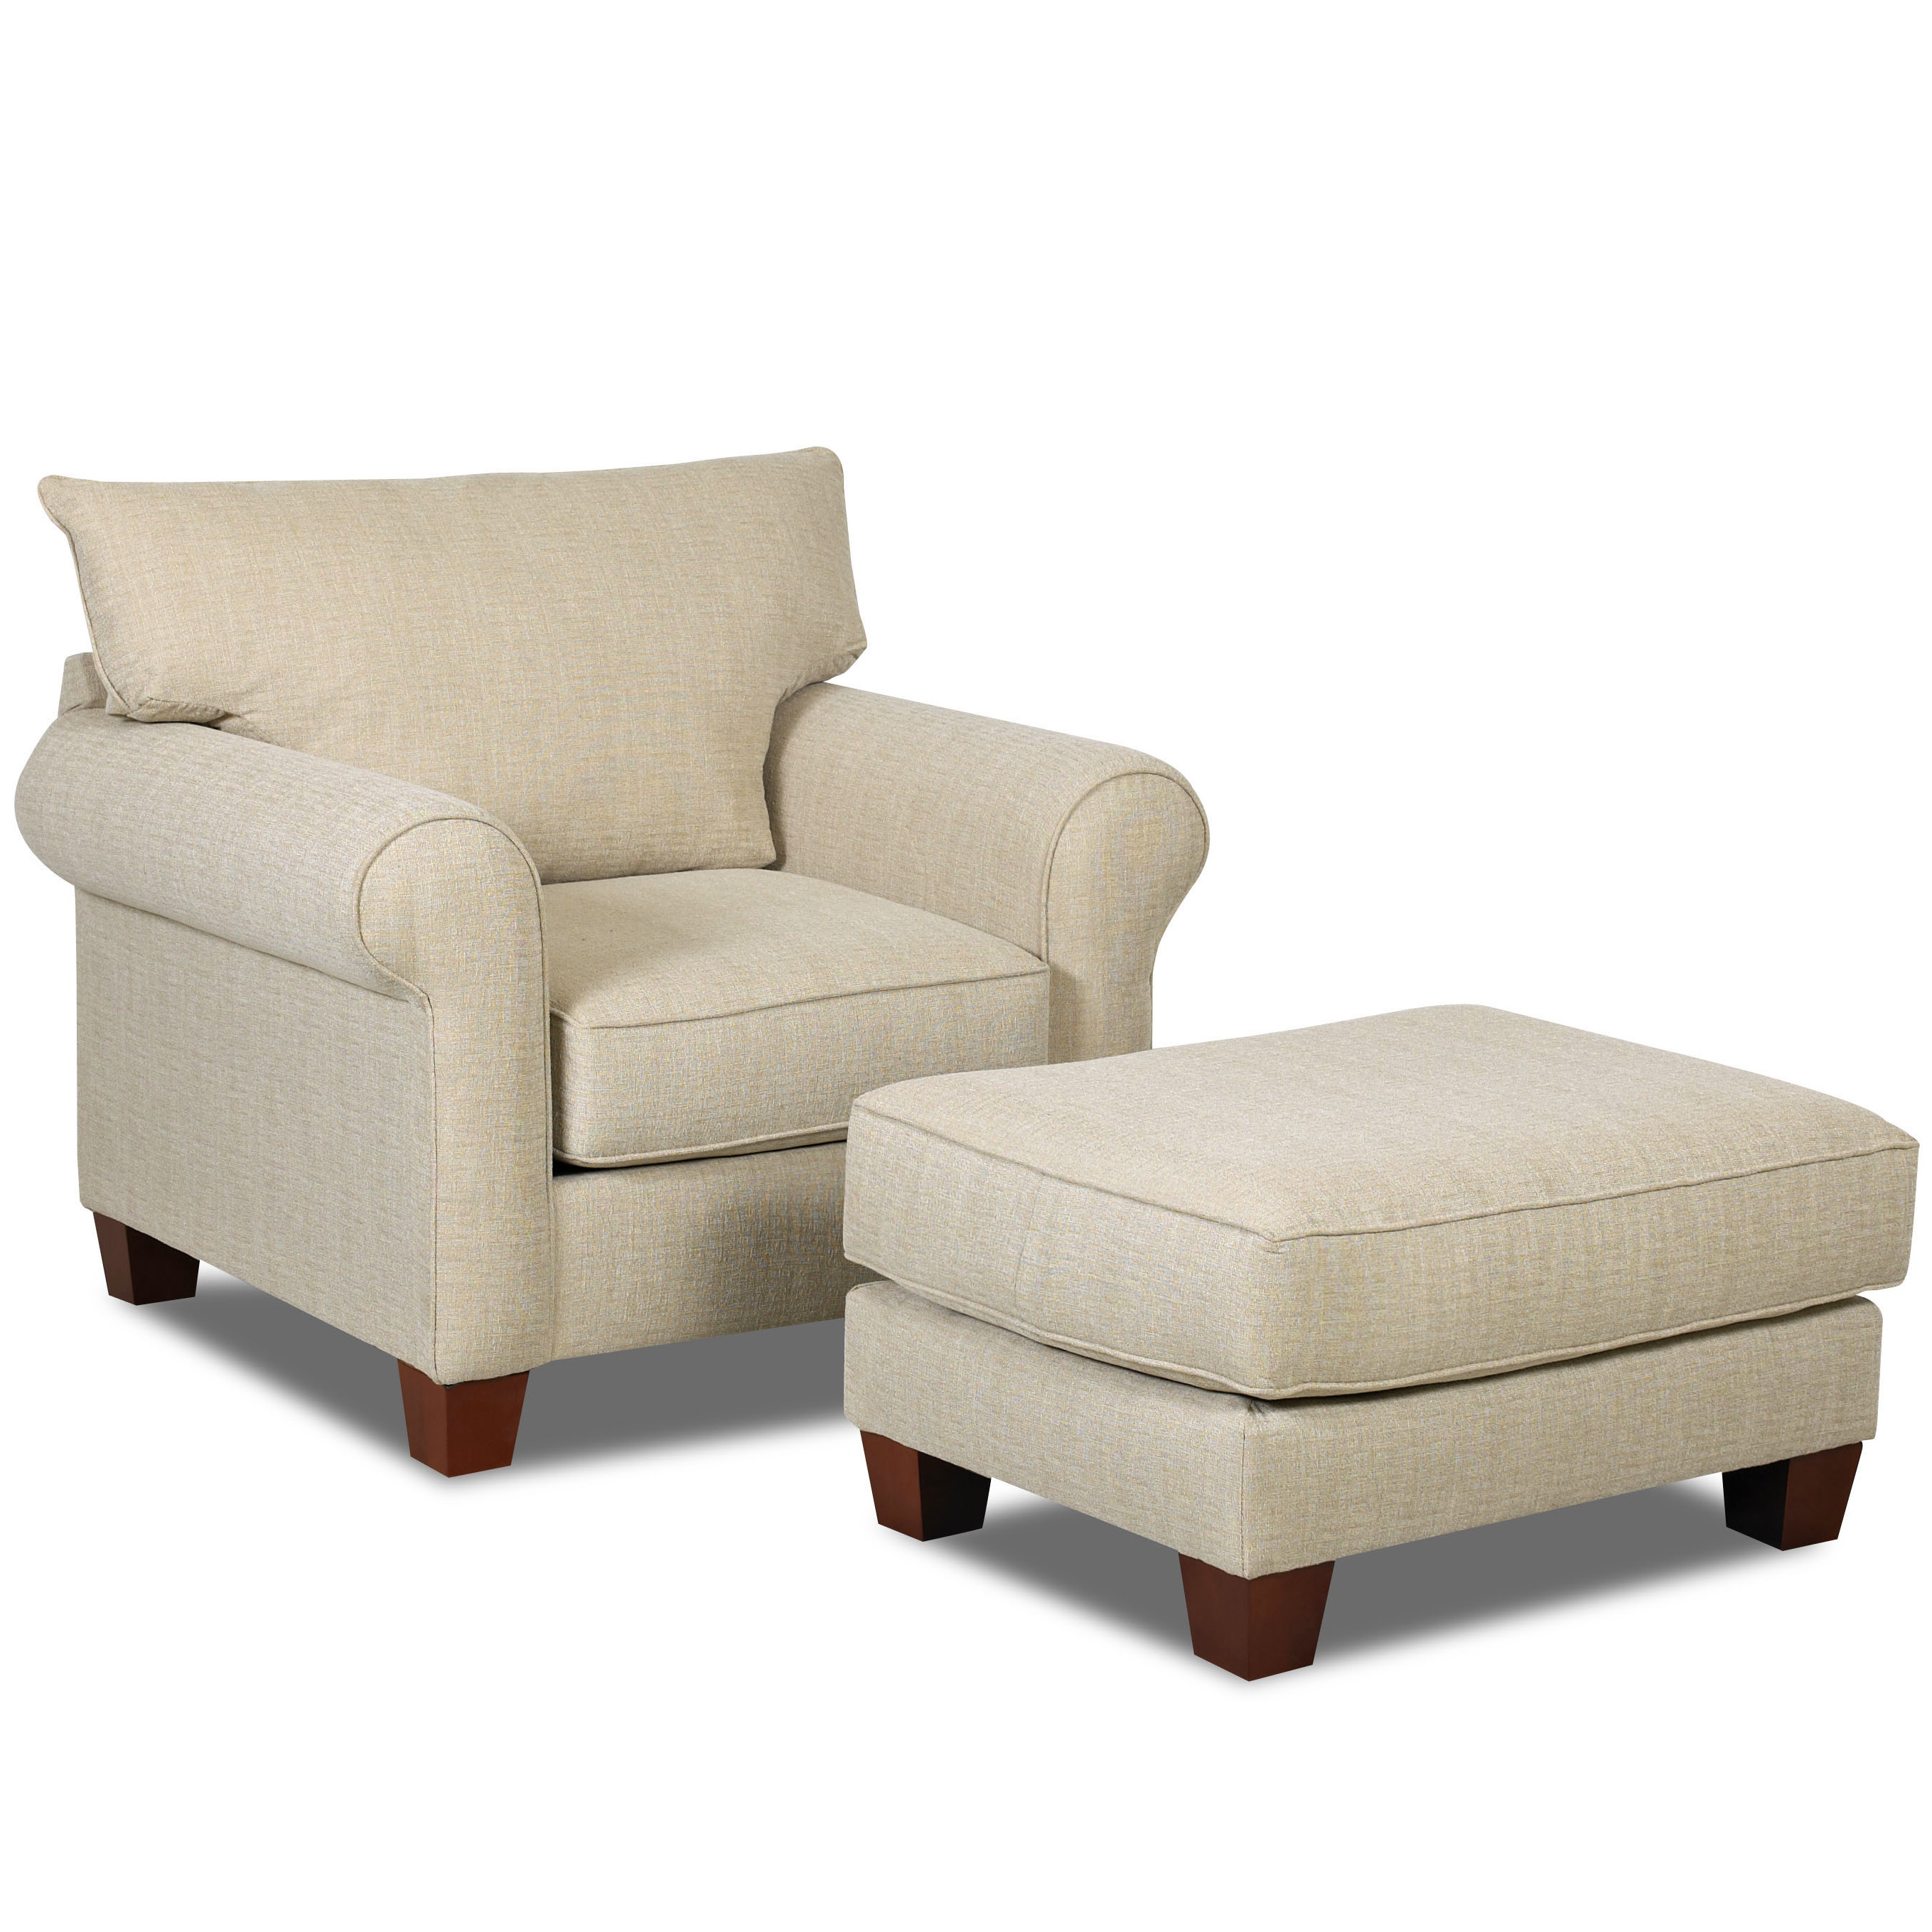 oversized chair and ottoman sets